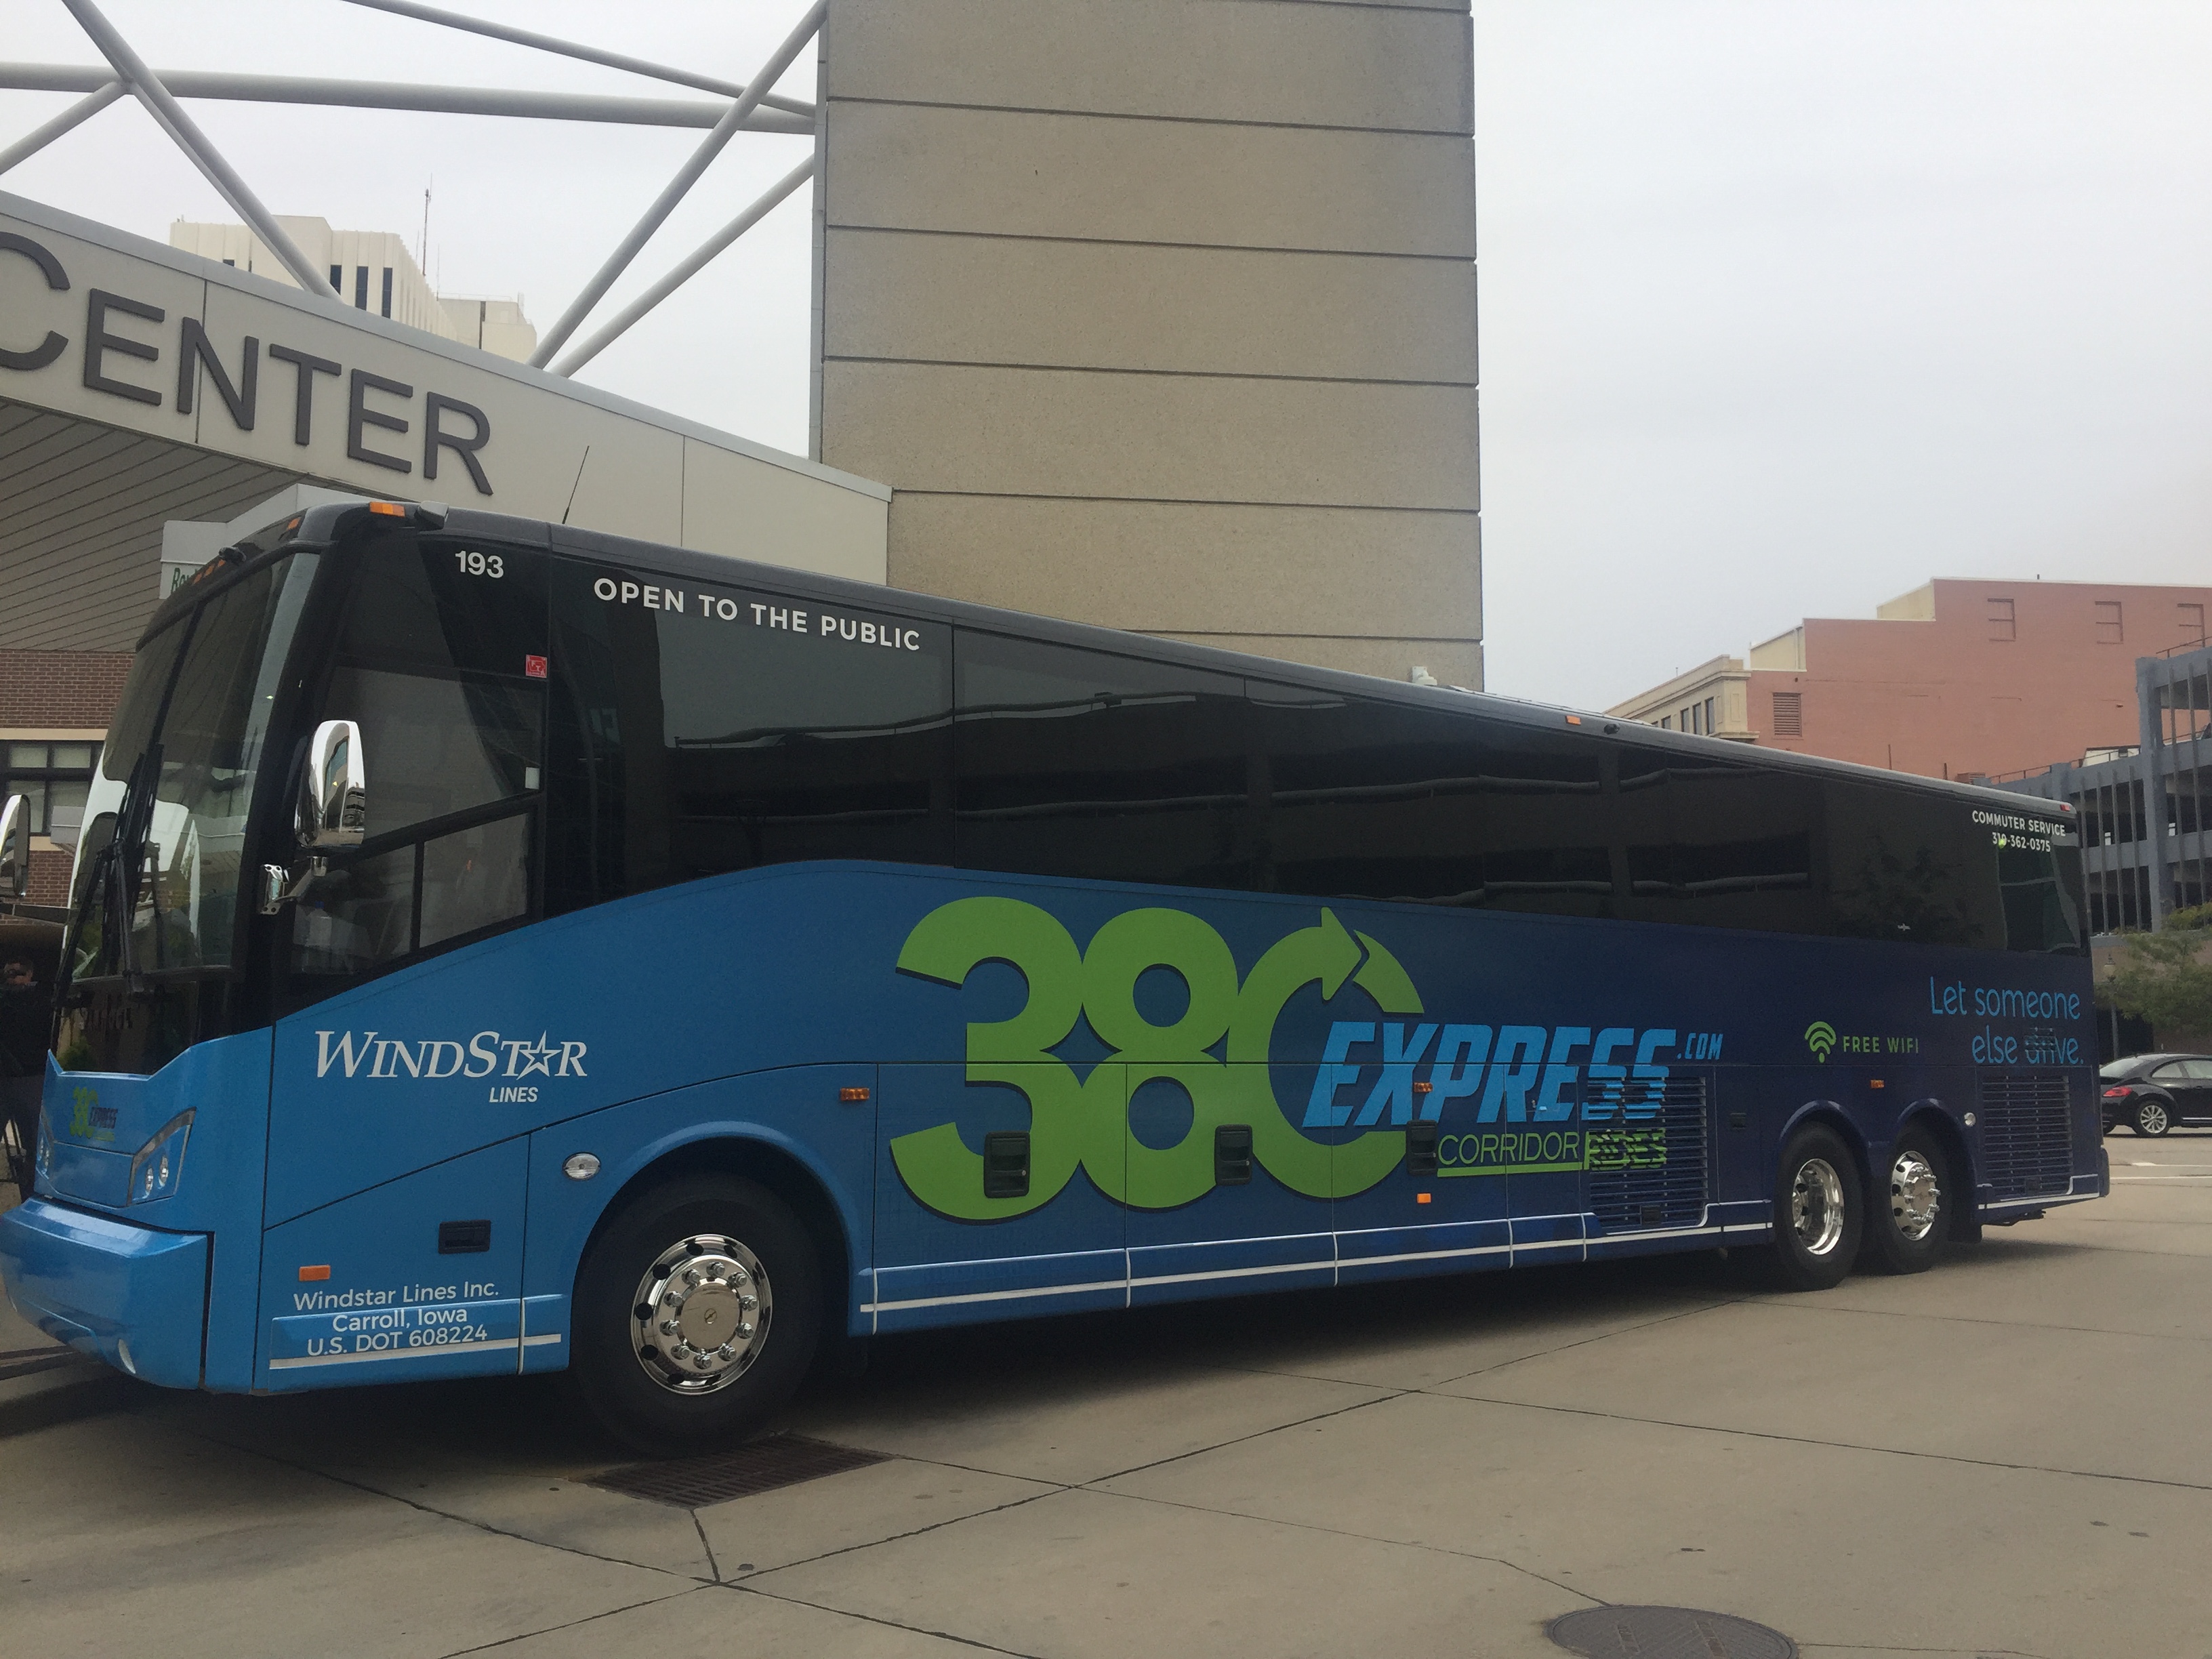 Interstate 380 express service between Cedar Rapids and Iowa City launches